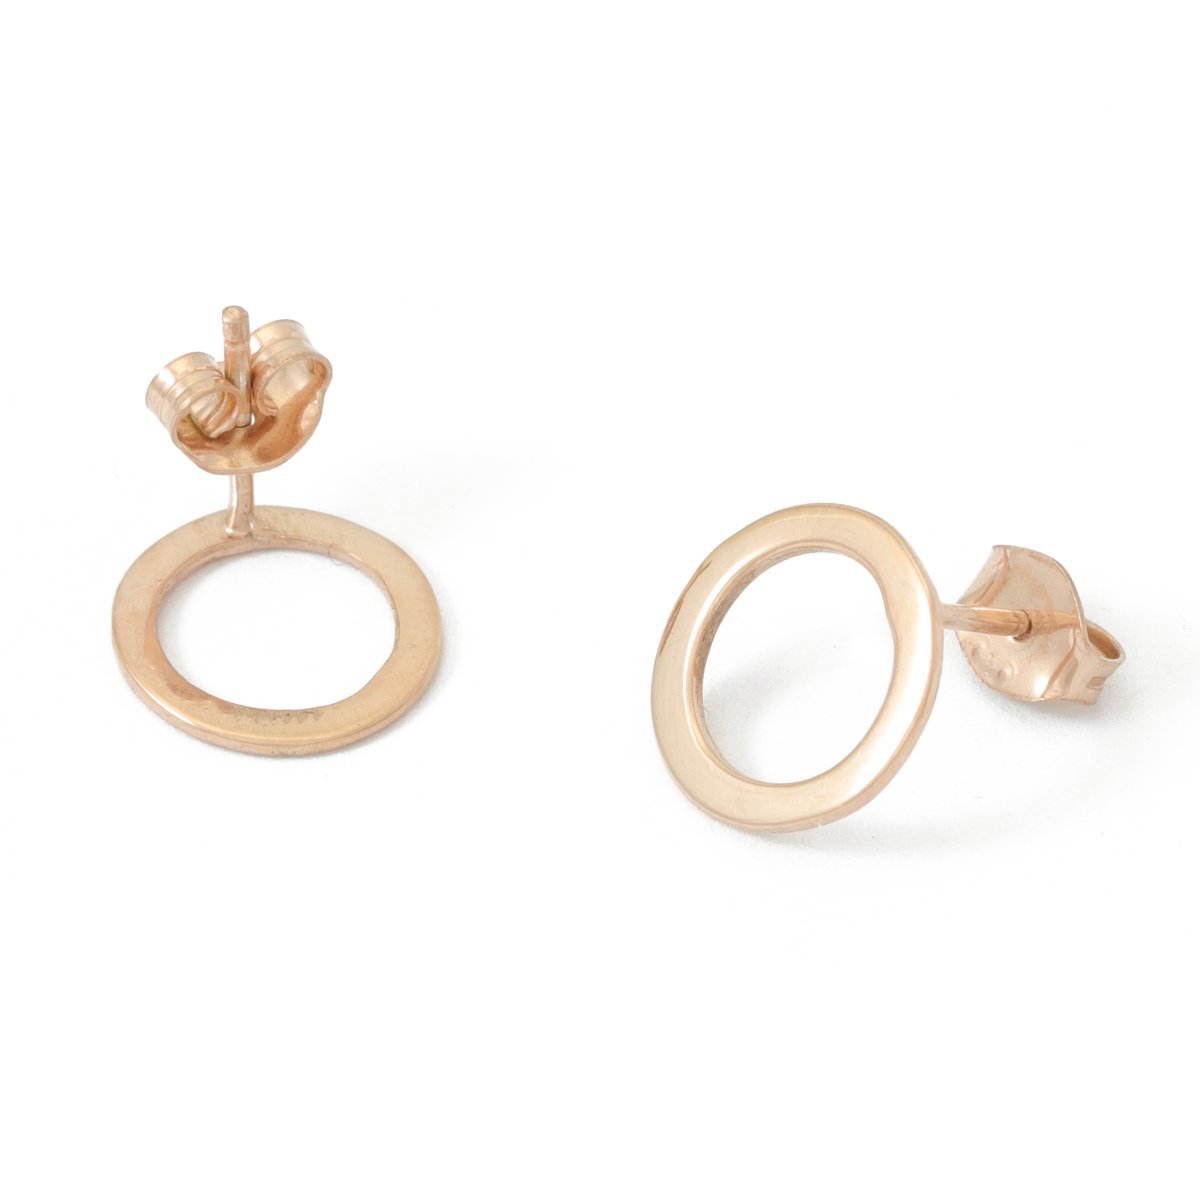 Radiate confidence with these classic 9ct Rose Gold studs⁠ from our Jardin collection.⁠
See more at miinella.com/collections/ja…⁠
#miinella #mymiinella #rosegoldstuds #circlestuds #rosegold⁠
#miinellajewellerydesign #designerjewellery #jewellerydesigner #localjeweller